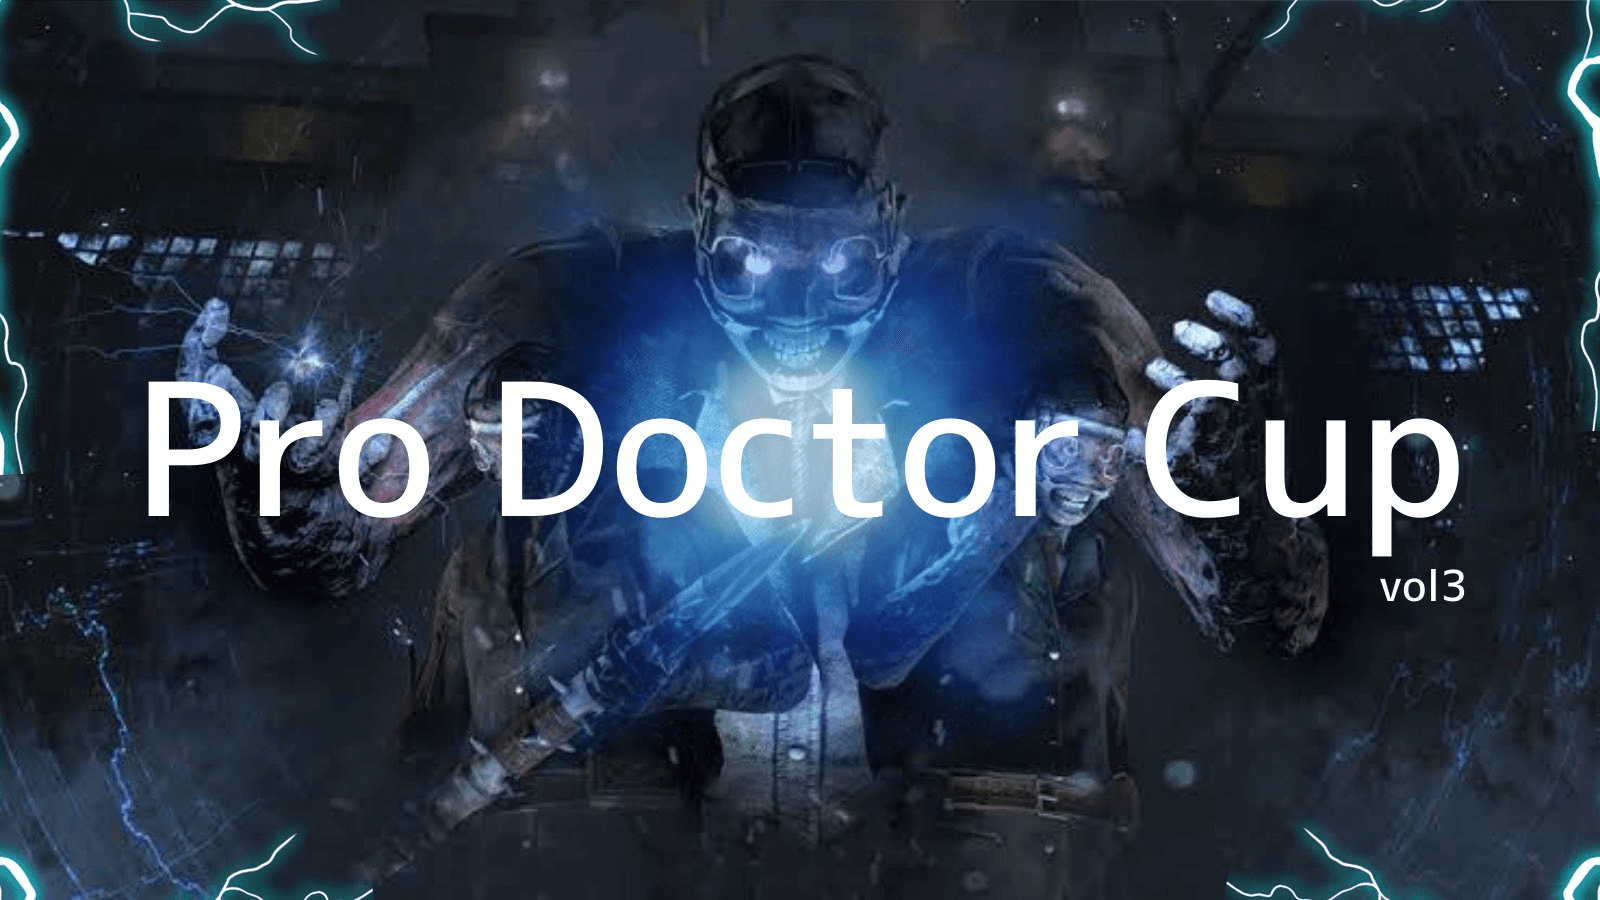 Pro Doctor Cup vol.3 feature image